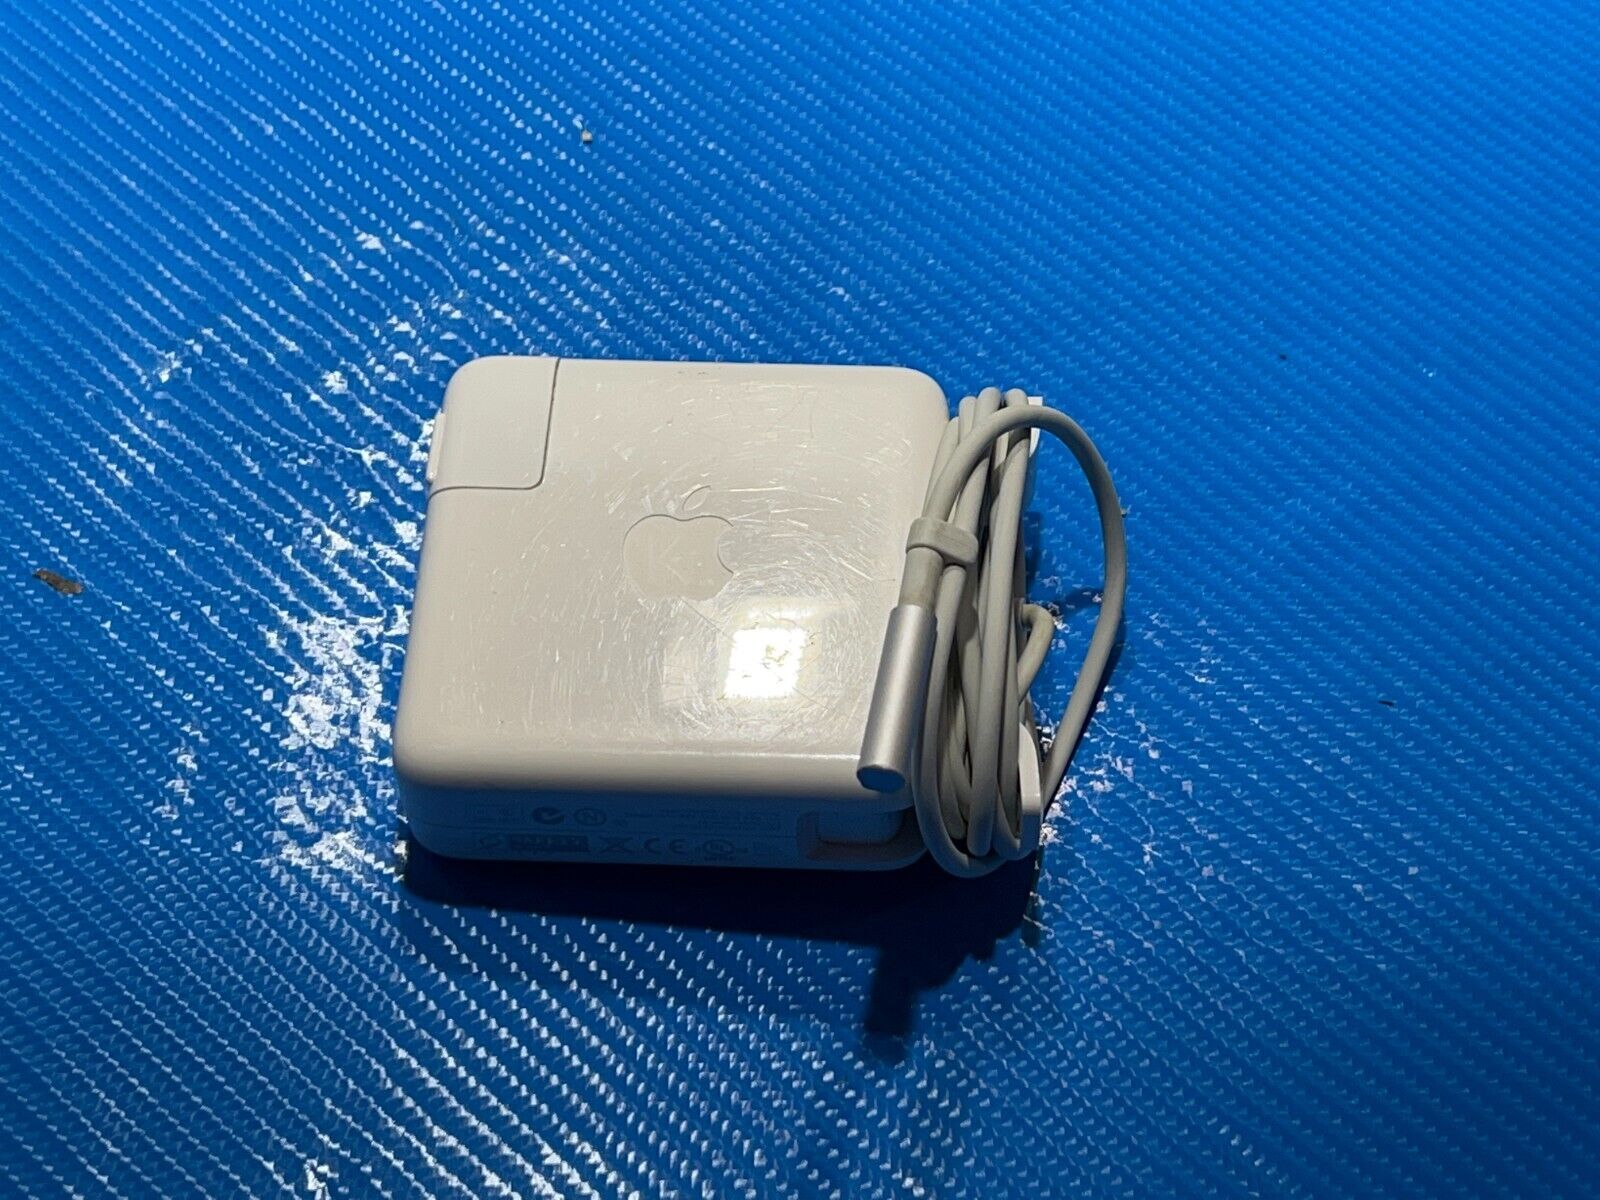 Lot of 6 Apple Laptop MagSafe Power Adapters 85w A1343